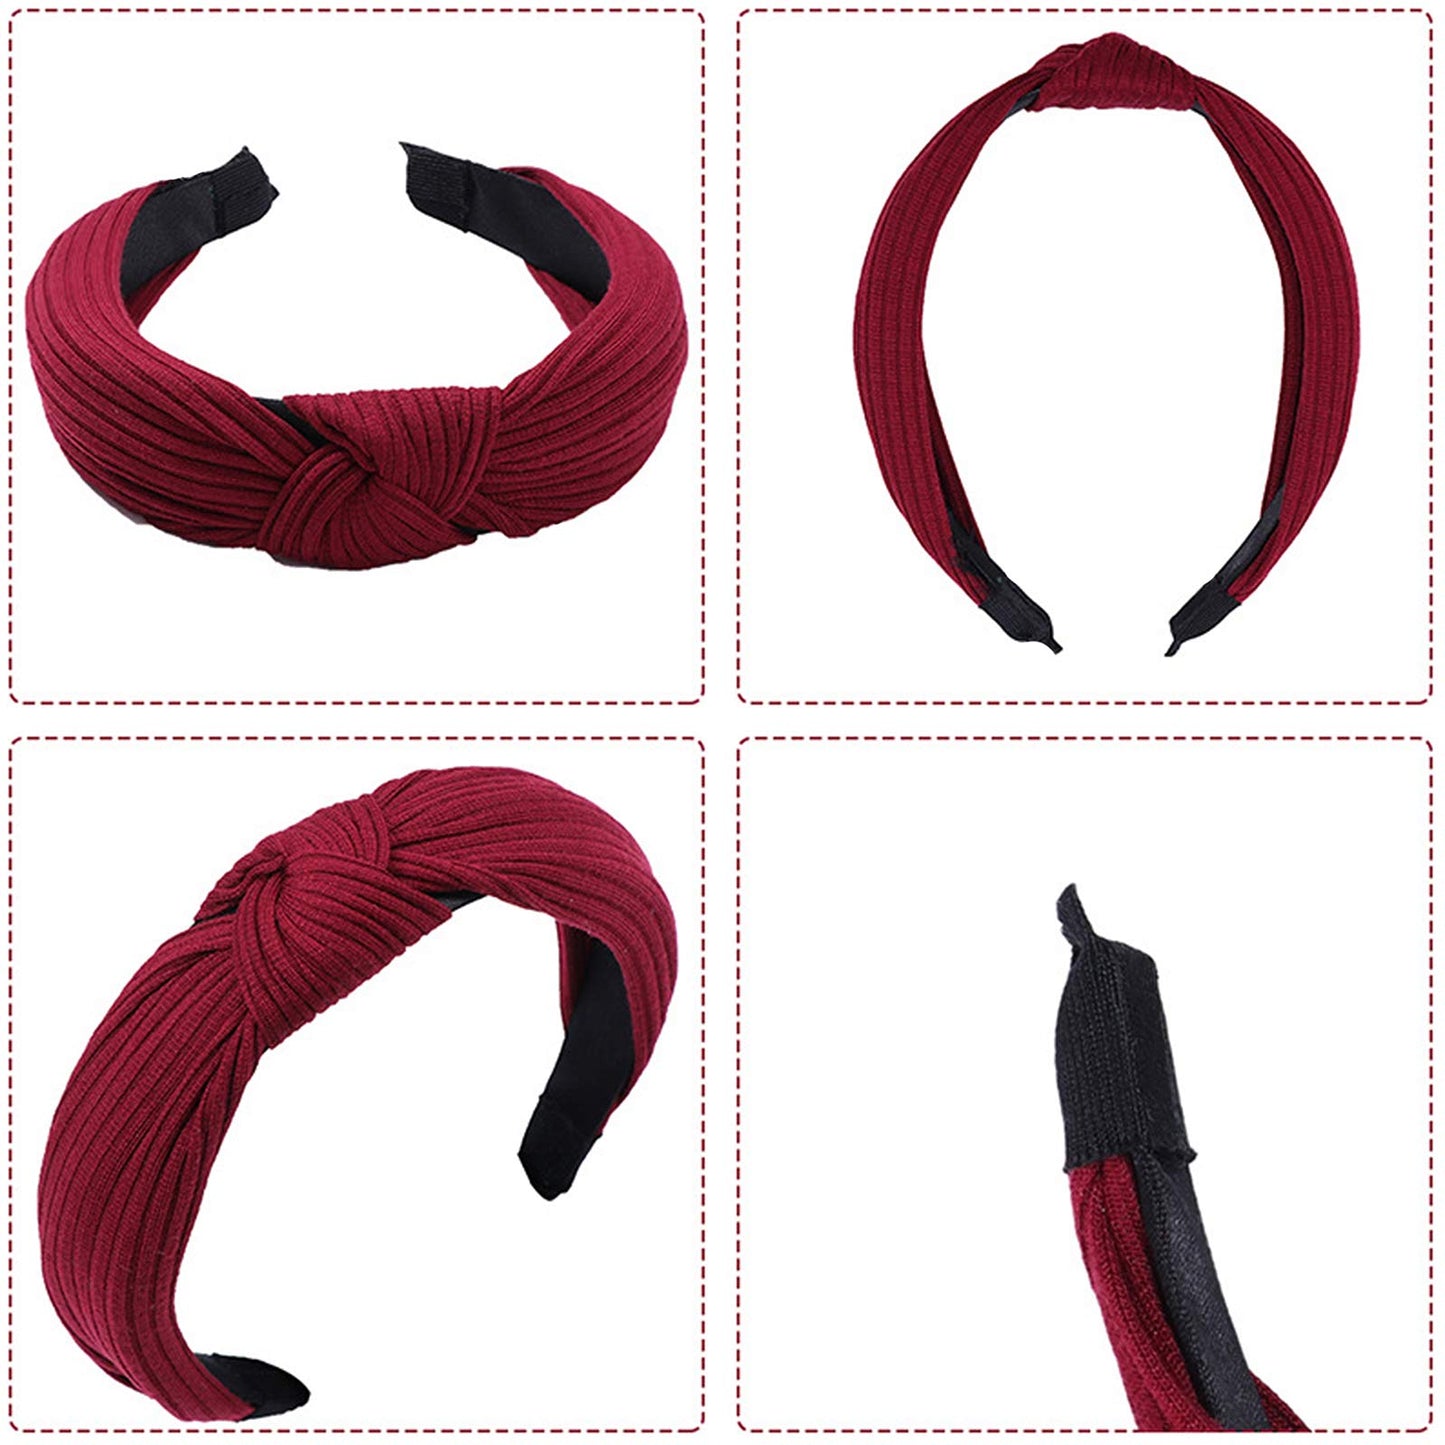 Ondder 10 Pack Knotted Headbands for Women Top Knot Headband Fashion Headbands for Girls Cute Head Band Solid Color Womens Headbands Non Slip for Women Ladies Girls Diademas Para Mujer De Moda